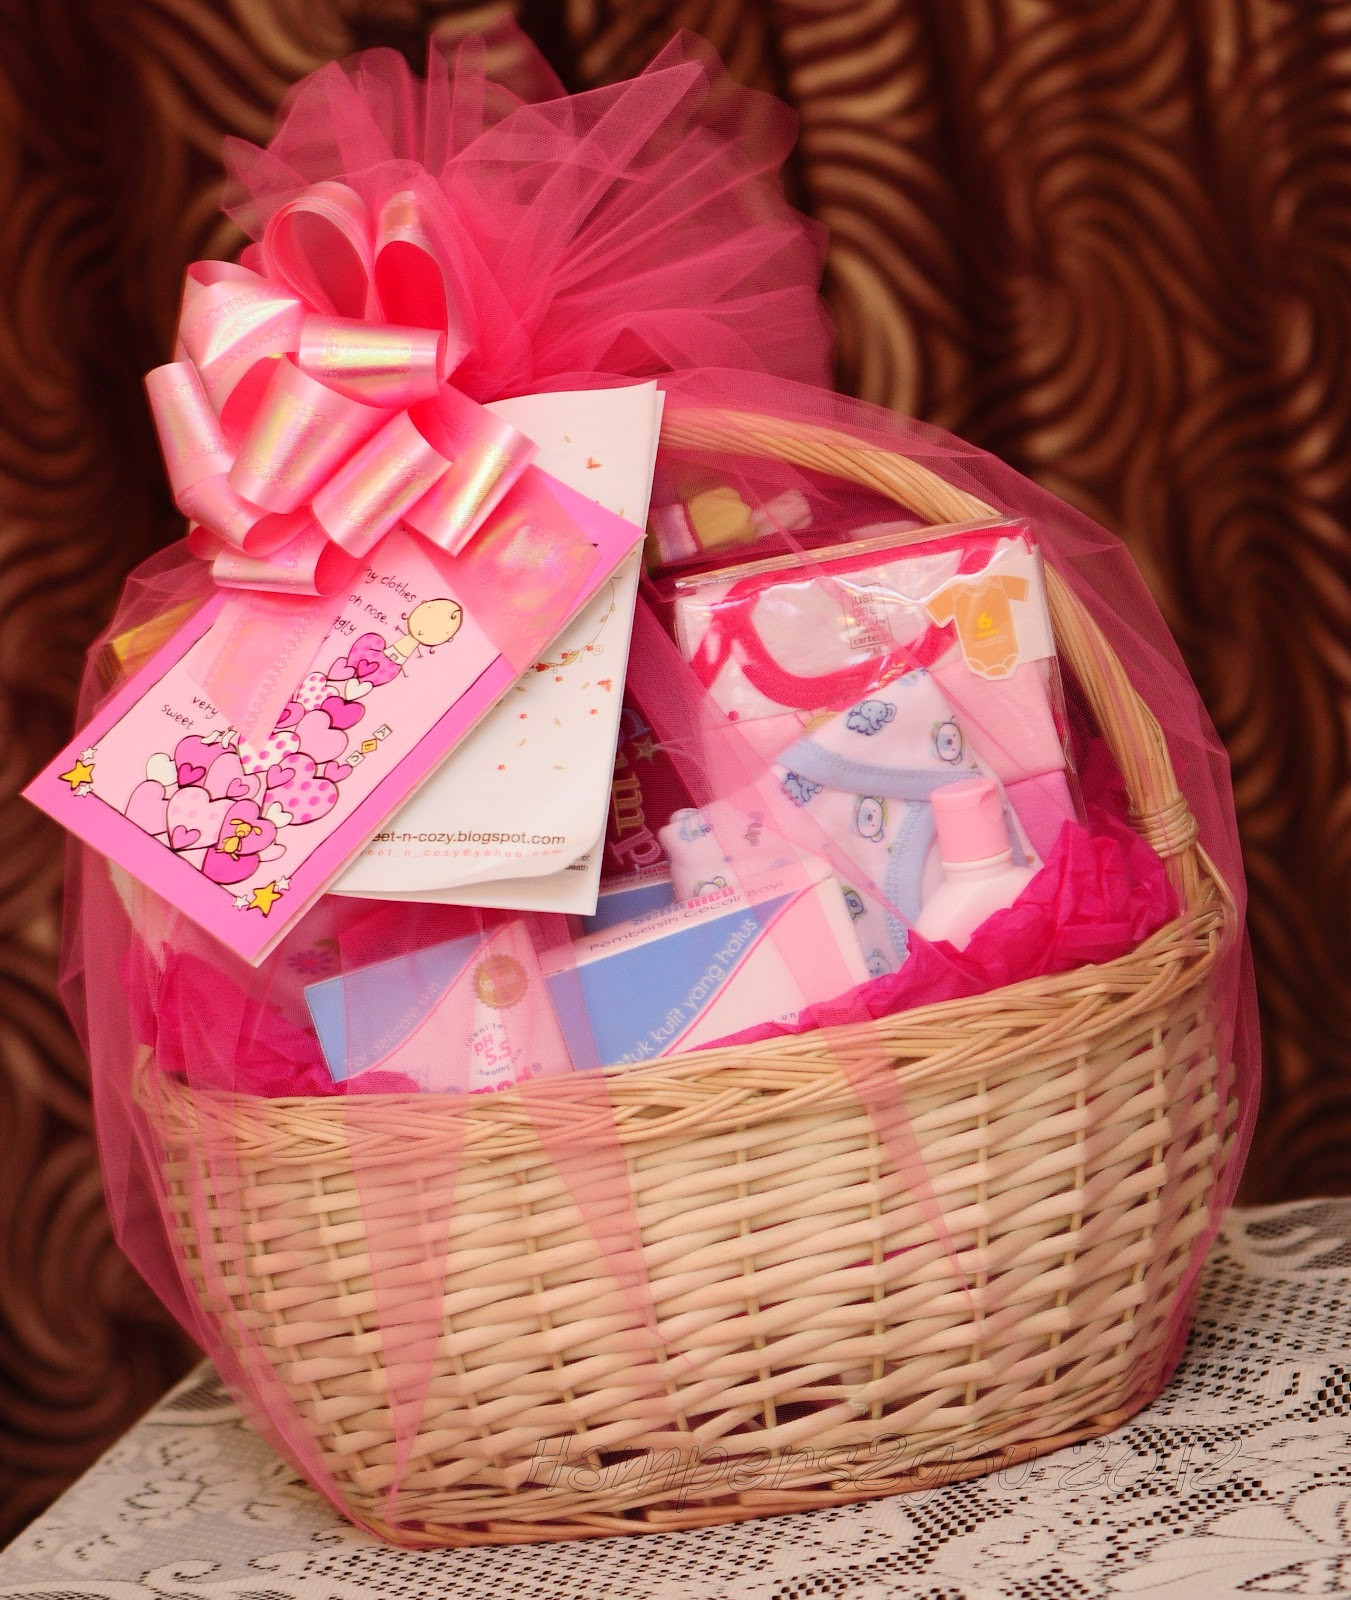 Gift Basket New Baby
 Hampers2you Baby Gift Baskets for Newborn Girl